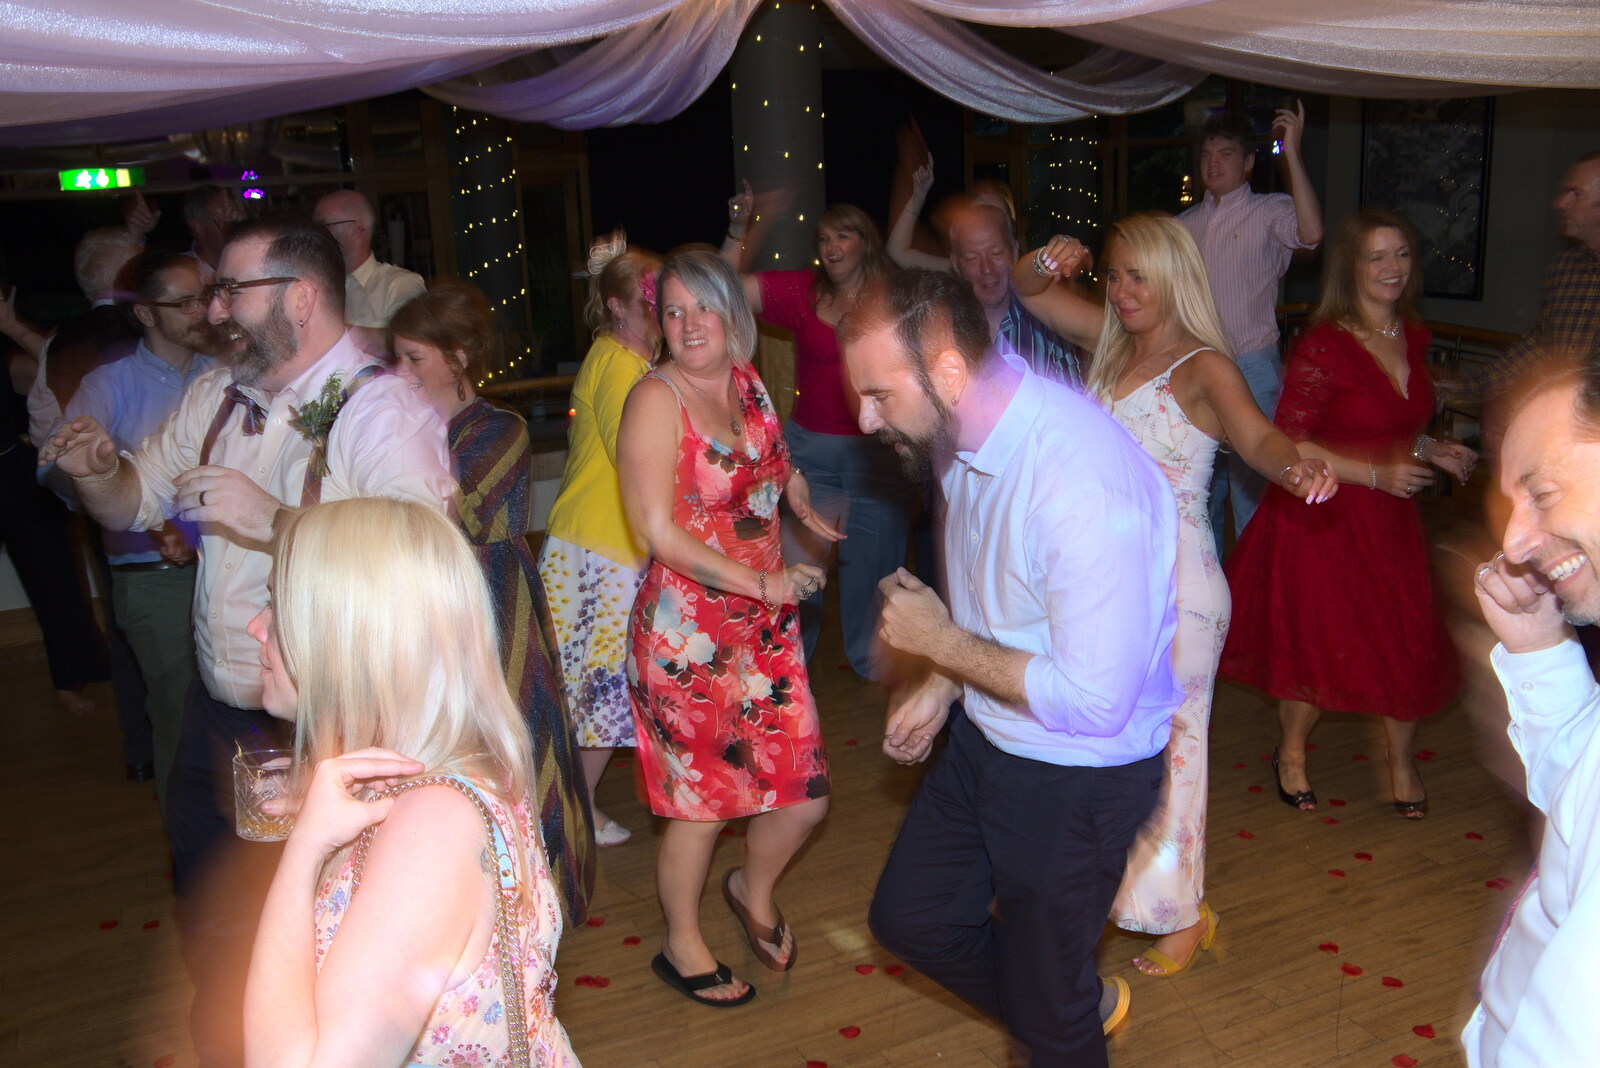 Disco dancing from Petay's Wedding Reception, Fanhams Hall, Ware, Hertfordshire - 20th August 2021